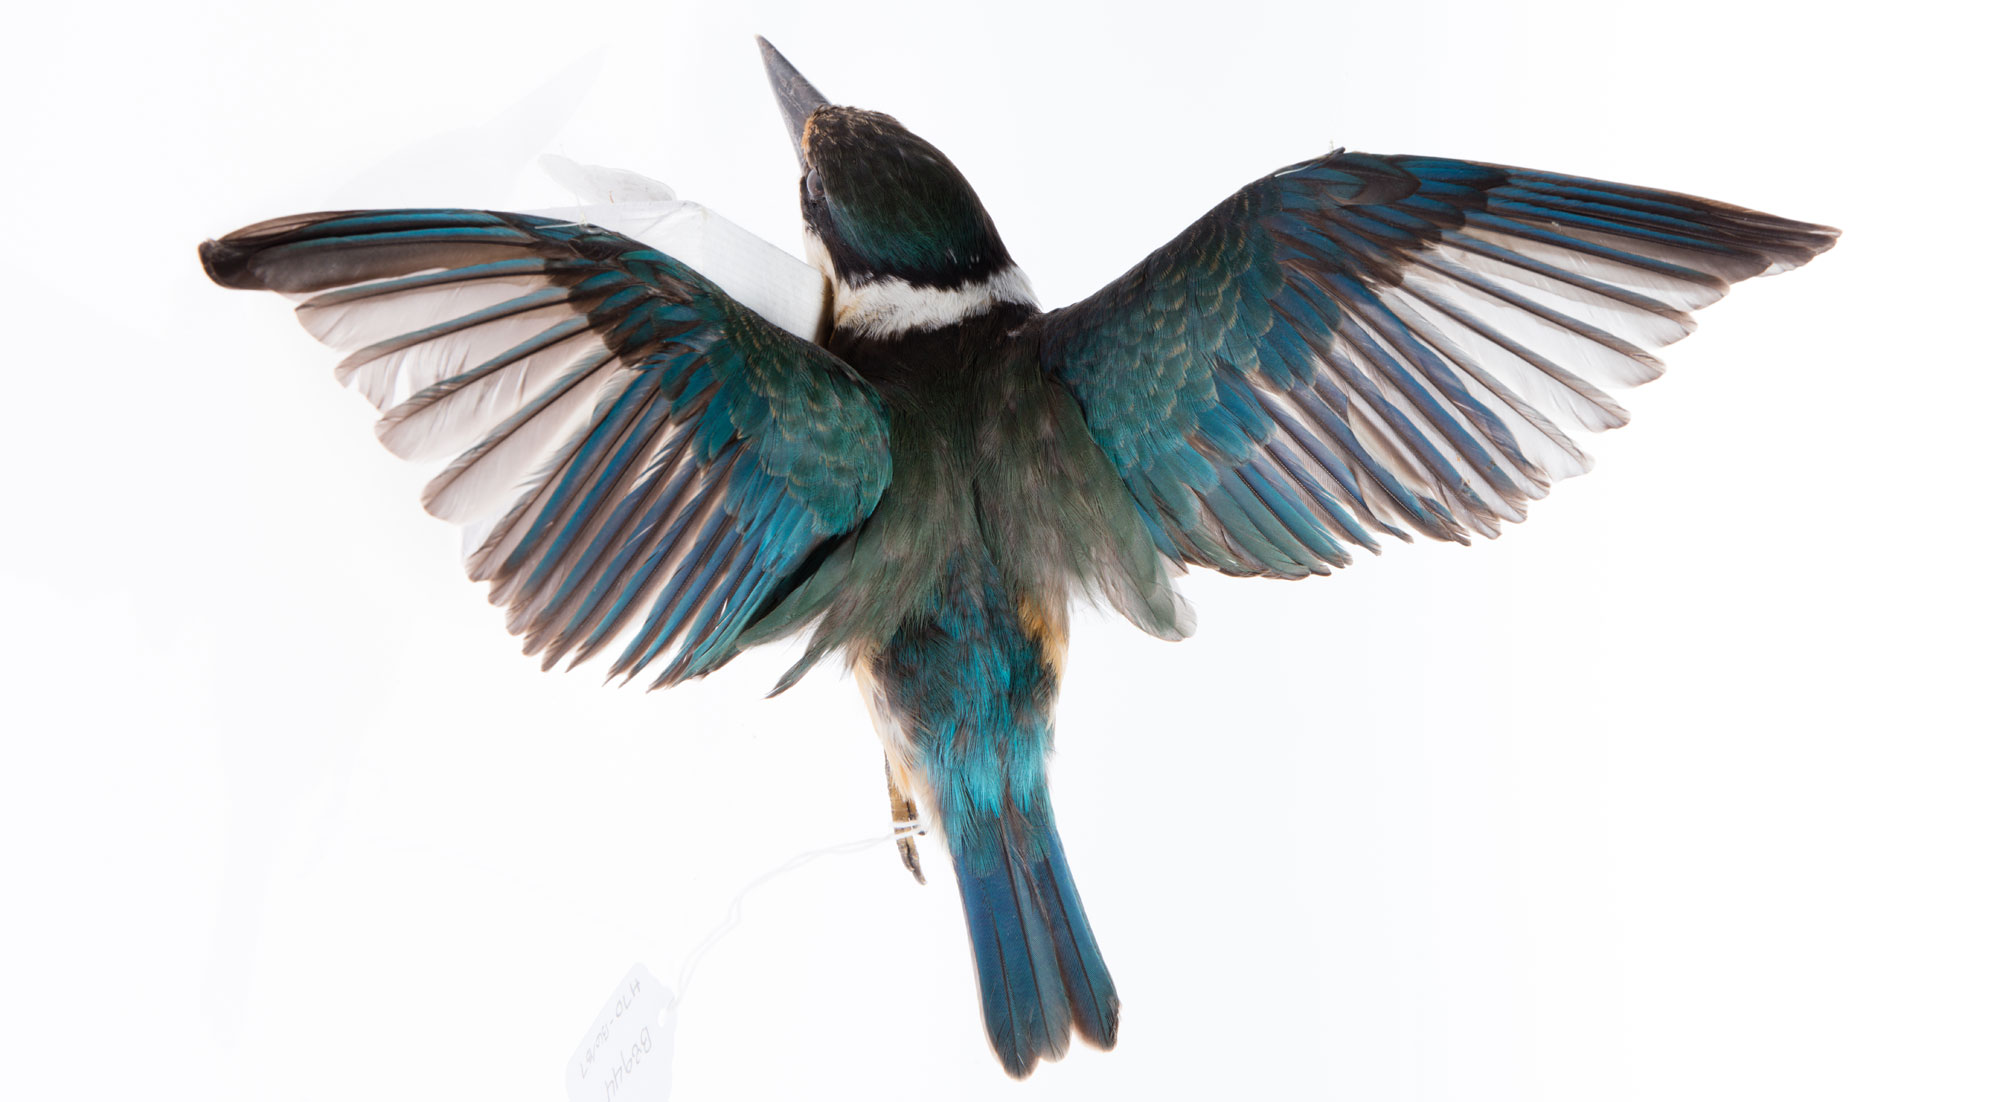 Museum specimen of sacred kingfisher displayed laying on its breast with its wings spread.